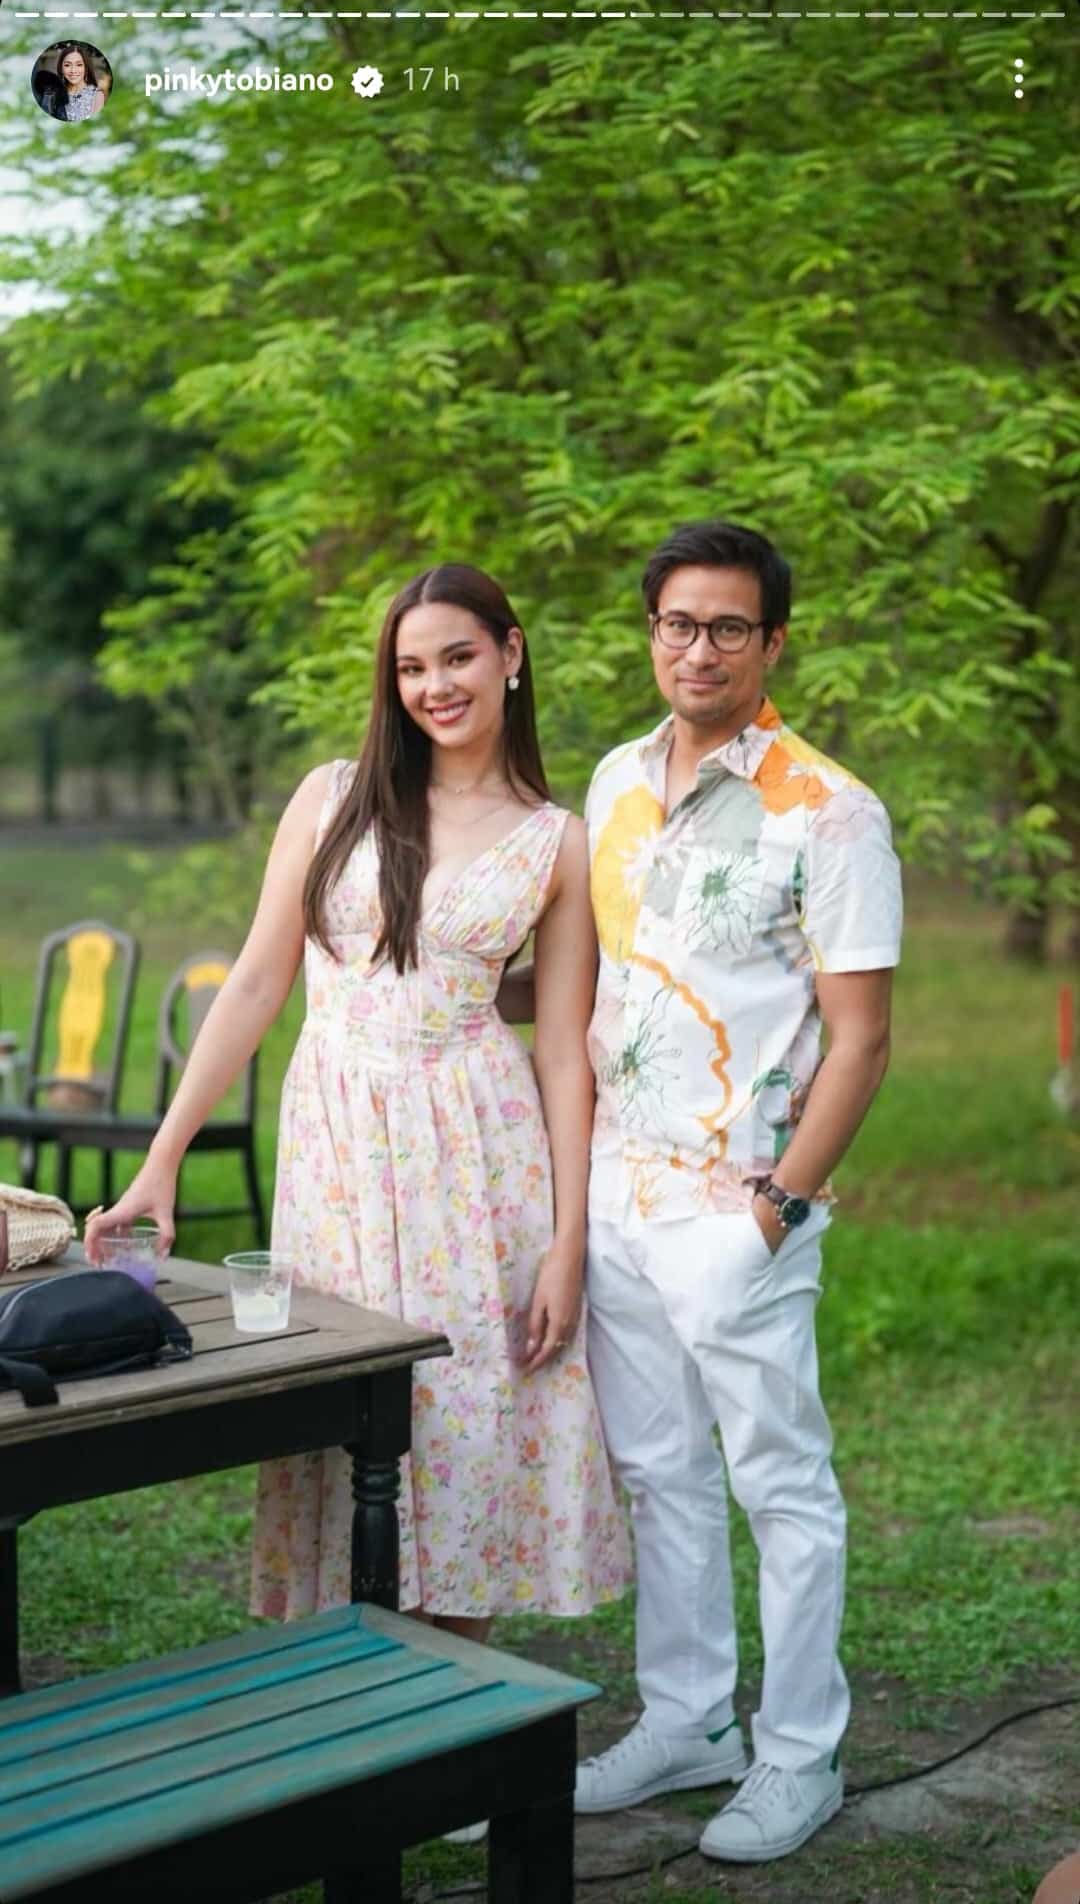 (From left) Catriona Gray and Sam Milby. Image: Screengrab from Instagram/@pinkytobiano